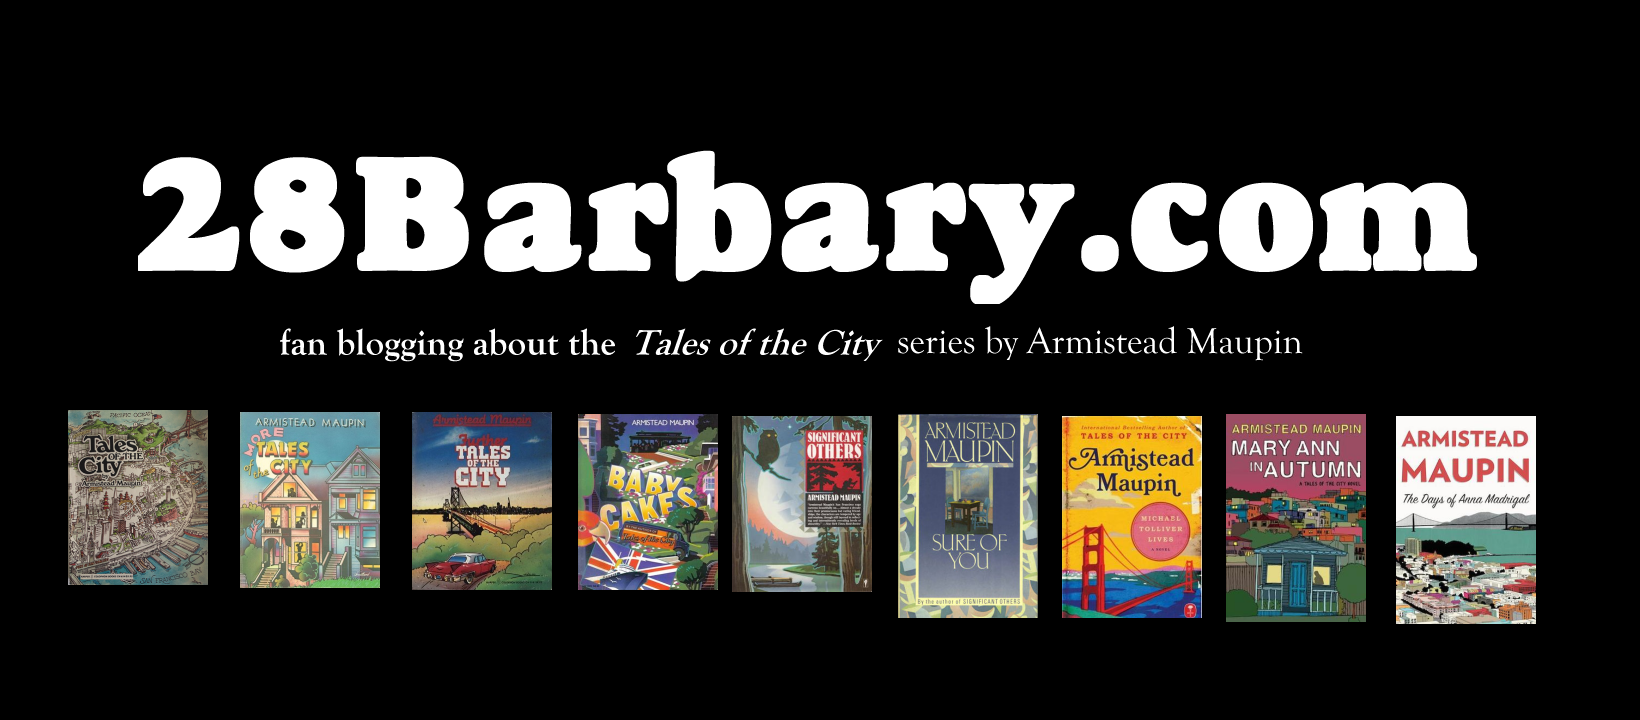 logo: 28Barbary.com - a blog about Tales of the City series by Armistead Maupin